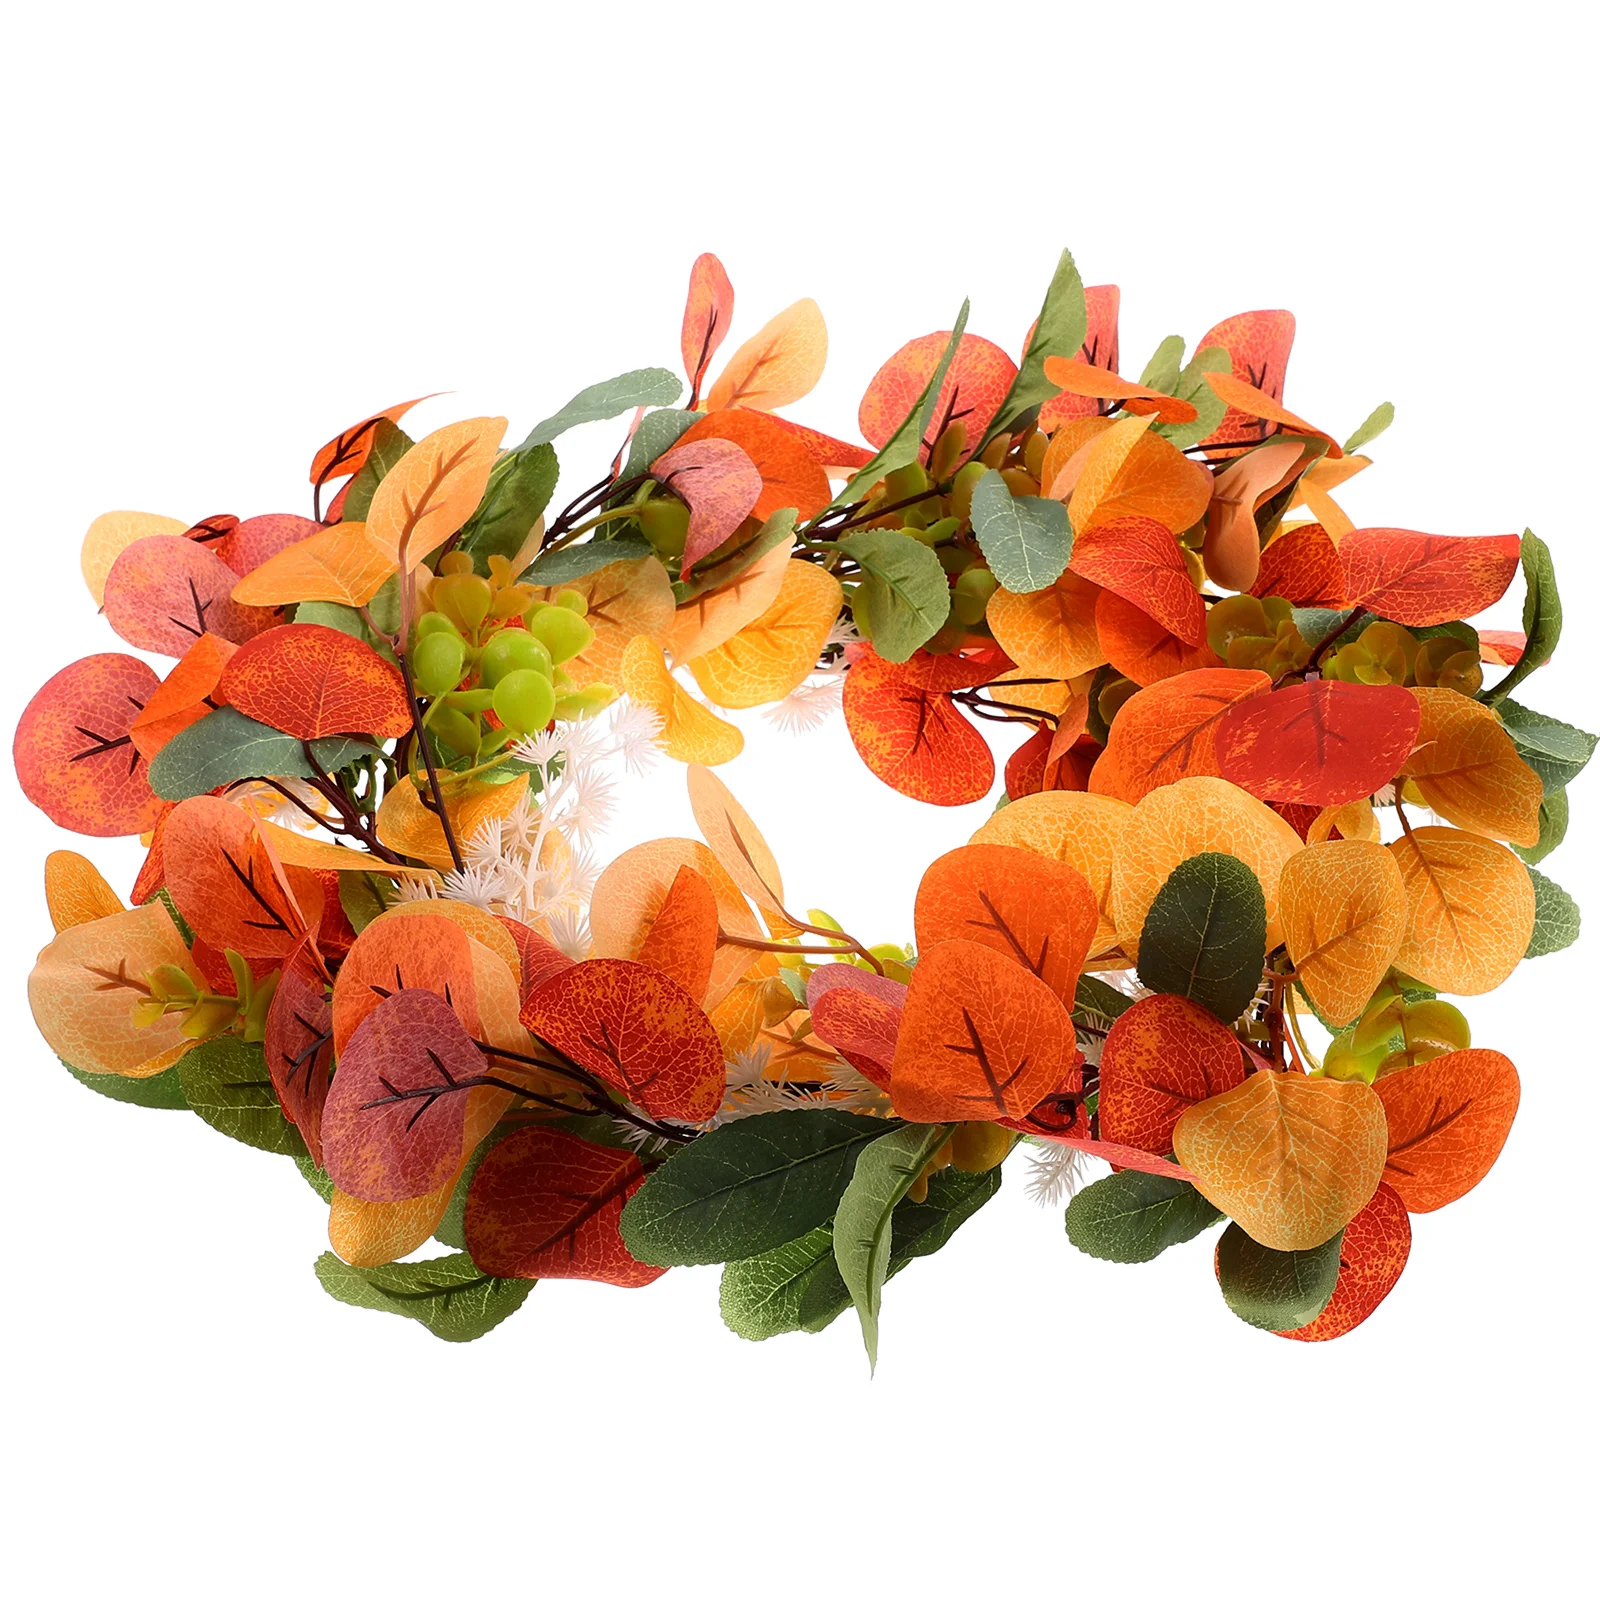 

Wreath Door Eucalyptus Garland Artificial Hanging Fall Leaf Front Leaves Thanksgiving Autumn Outdoor Decorative Festival Wreaths